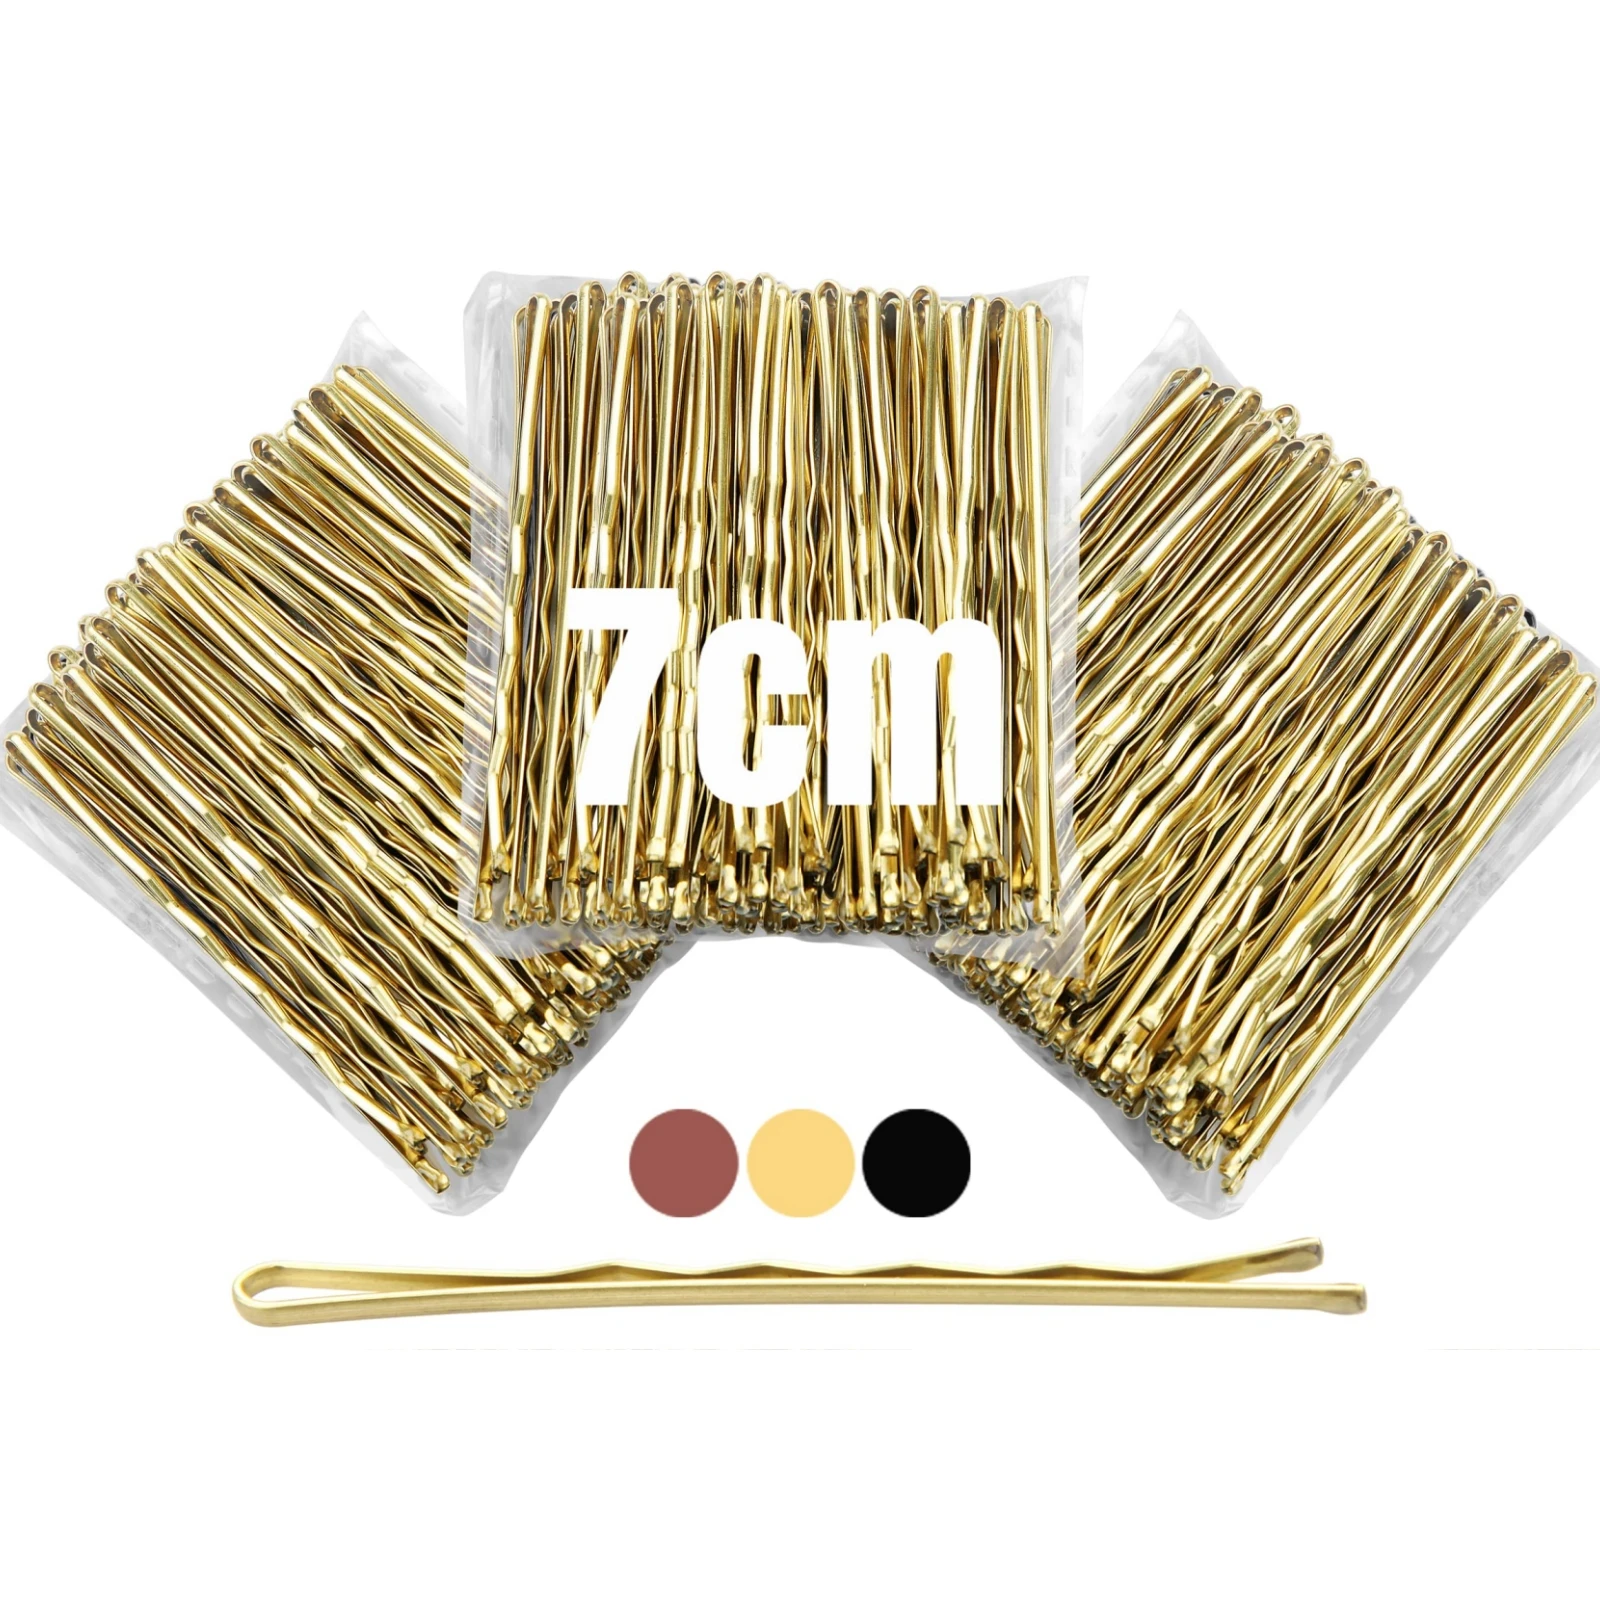 

50Pcs Hair Pins Kit Hair Clips Secure Hold Bobby Pins Hair Clips for Women Girls and Hairdressing Salon (Blonde)